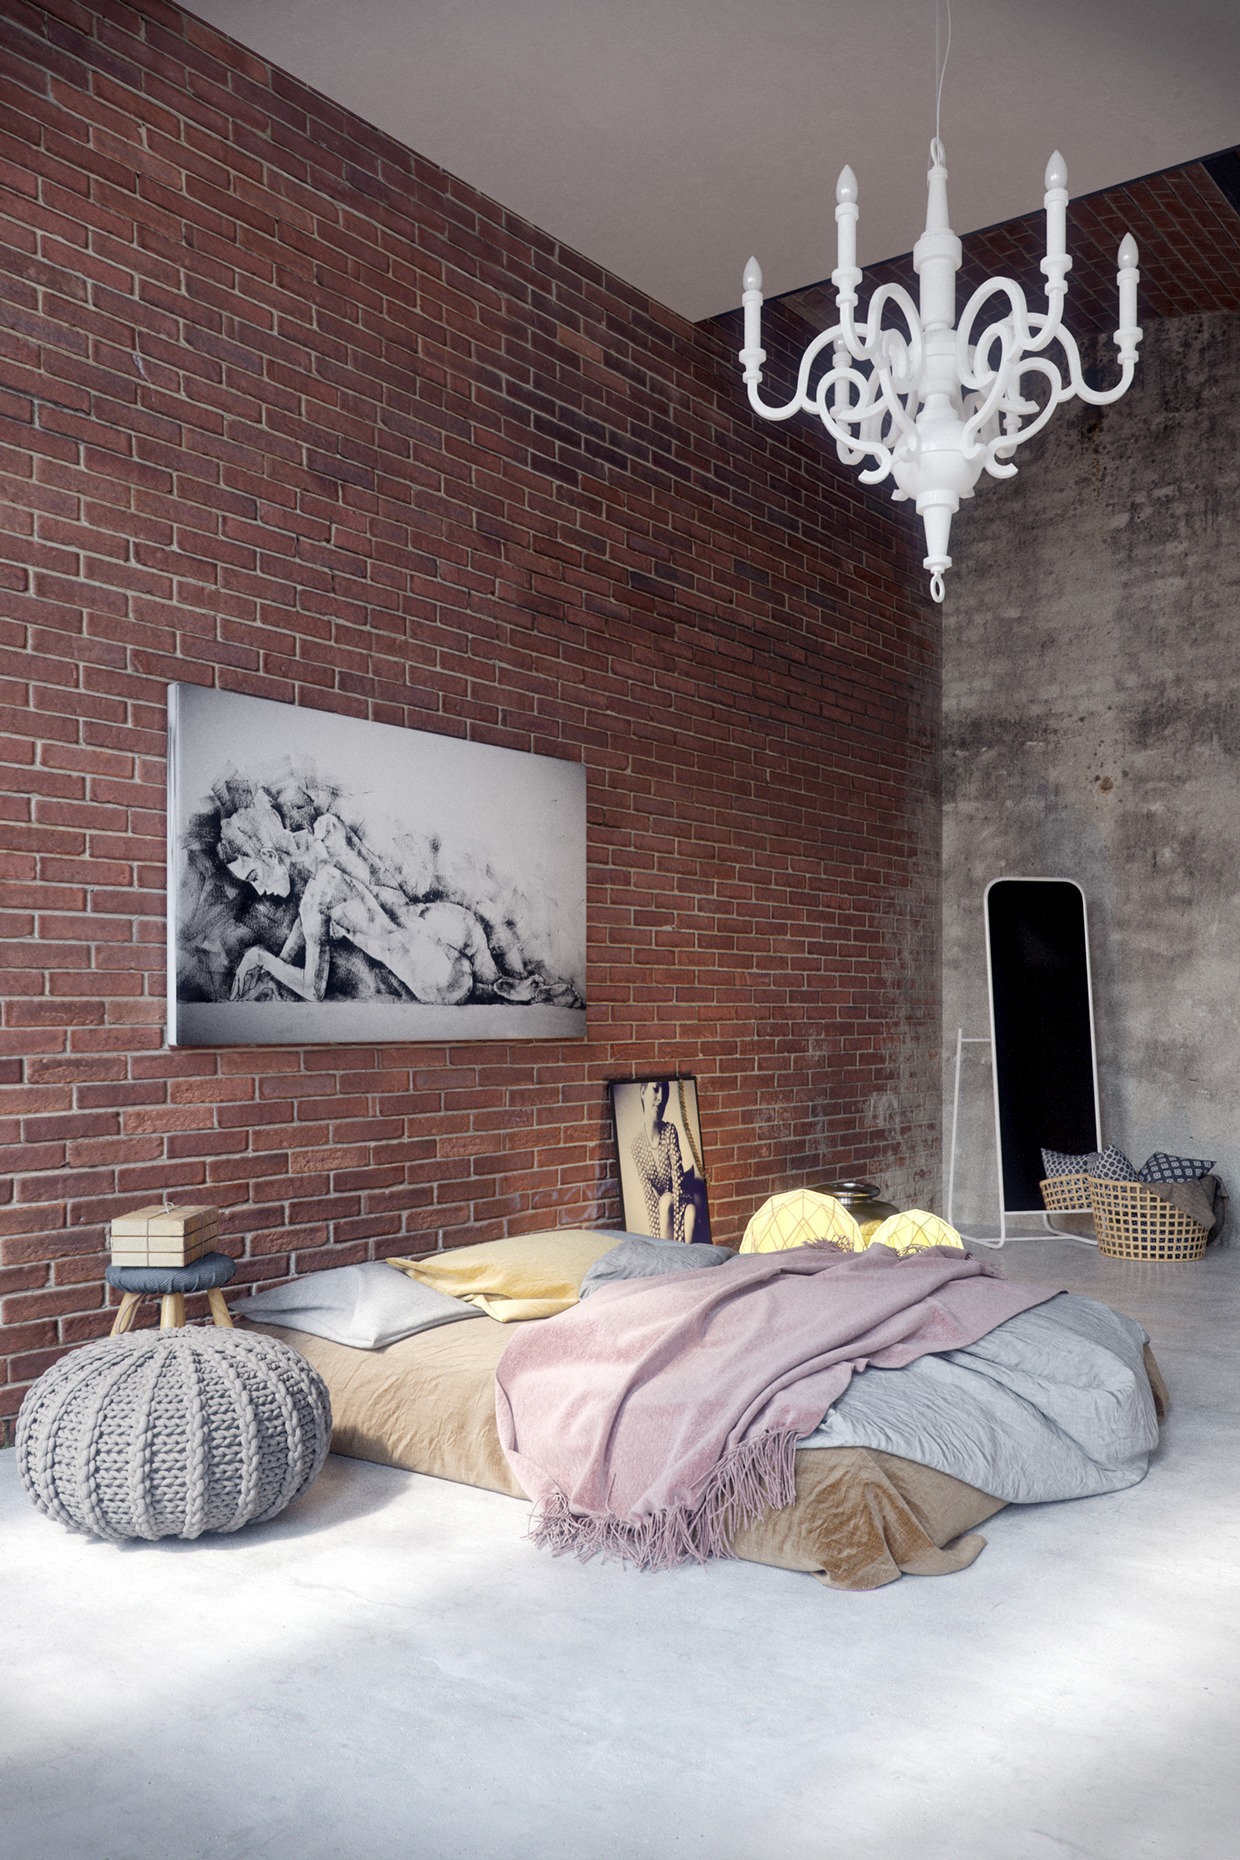 Bedroom design for young men "width =" 1240 "height =" 1860 "srcset =" https://mileray.com/wp-content/uploads/2020/05/1588505420_521_Unique-and-Artistic-Bedroom-Design-With-Simple-Furniture-For-Young.jpg 1240w, https: // myfashionos. com / wp-content / uploads / 2016/03 / white-chandelier-200x300.jpg 200w, https://mileray.com/wp-content/uploads/2016/03/white-chandelier-768x1152.jpg 768w, https: //mileray.com/wp-content/uploads/2016/03/white-chandelier-683x1024.jpg 683w, https://mileray.com/wp-content/uploads/2016/03/white-chandelier-696x1044.jpg 696w, https://mileray.com/wp-content/uploads/2016/03/white-chandelier-1068x1602.jpg 1068w, https://mileray.com/wp-content/uploads/2016/03/white-chandelier -280x420.jpg 280w "sizes =" (maximum width: 1240px) 100vw, 1240px